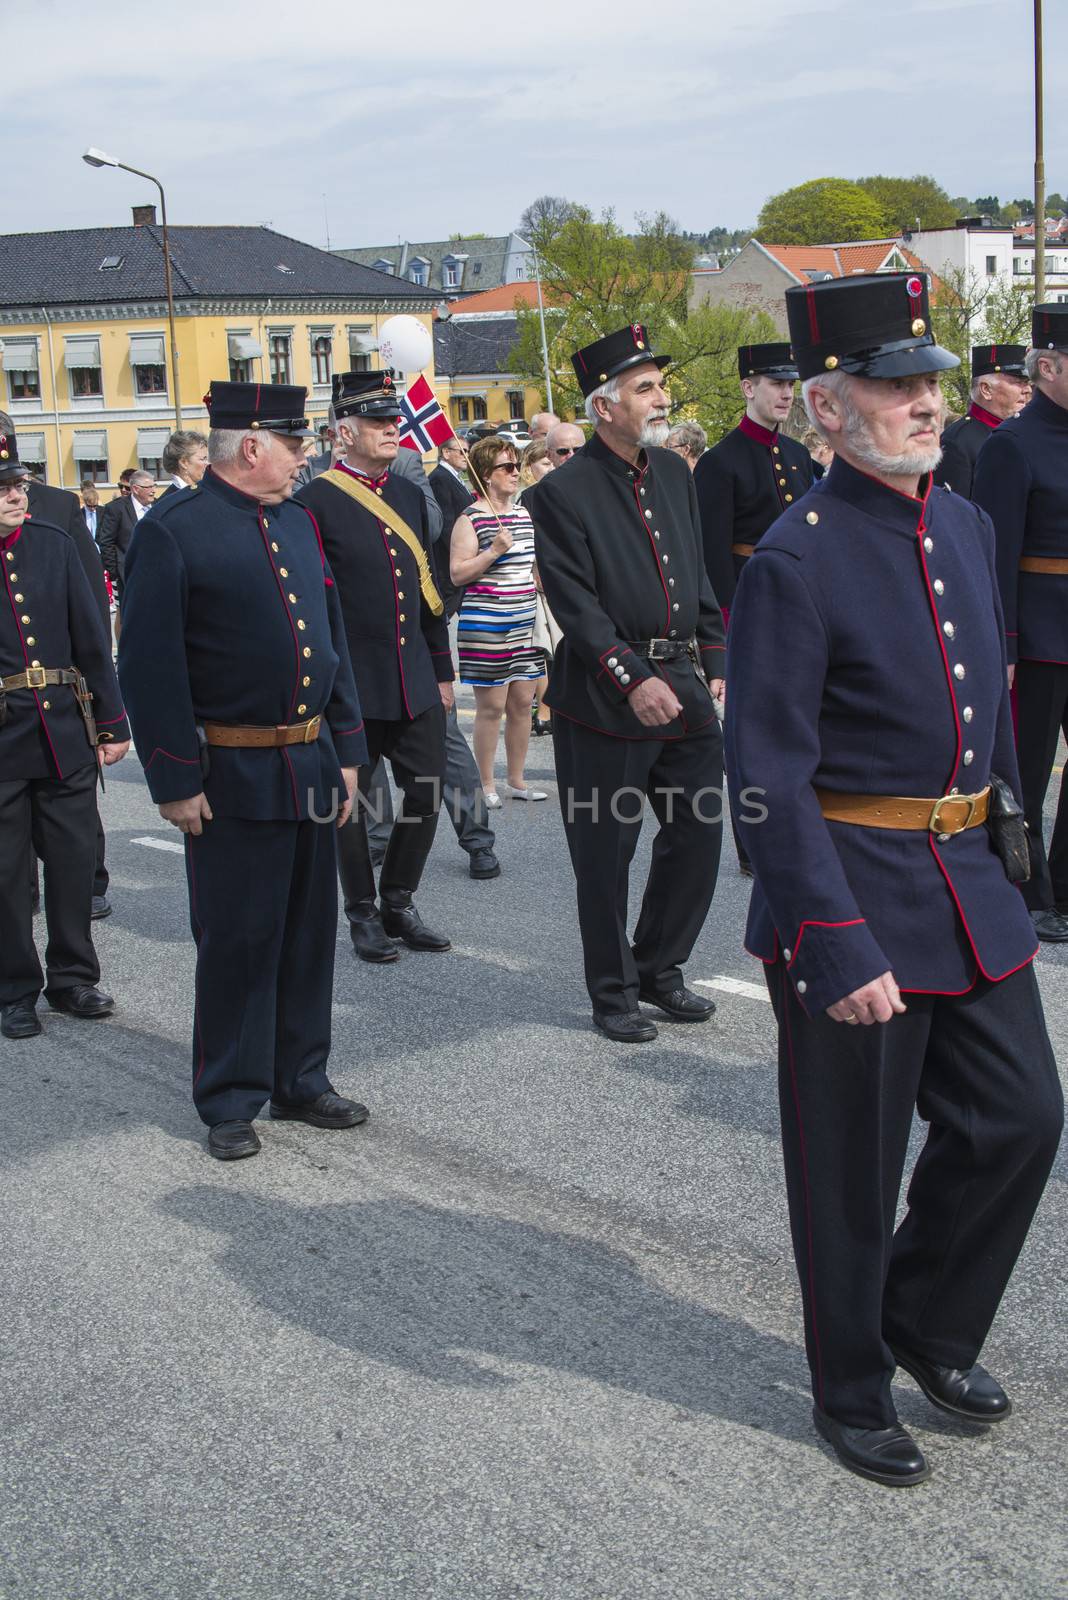 seventeenth of may, norway's national day by steirus